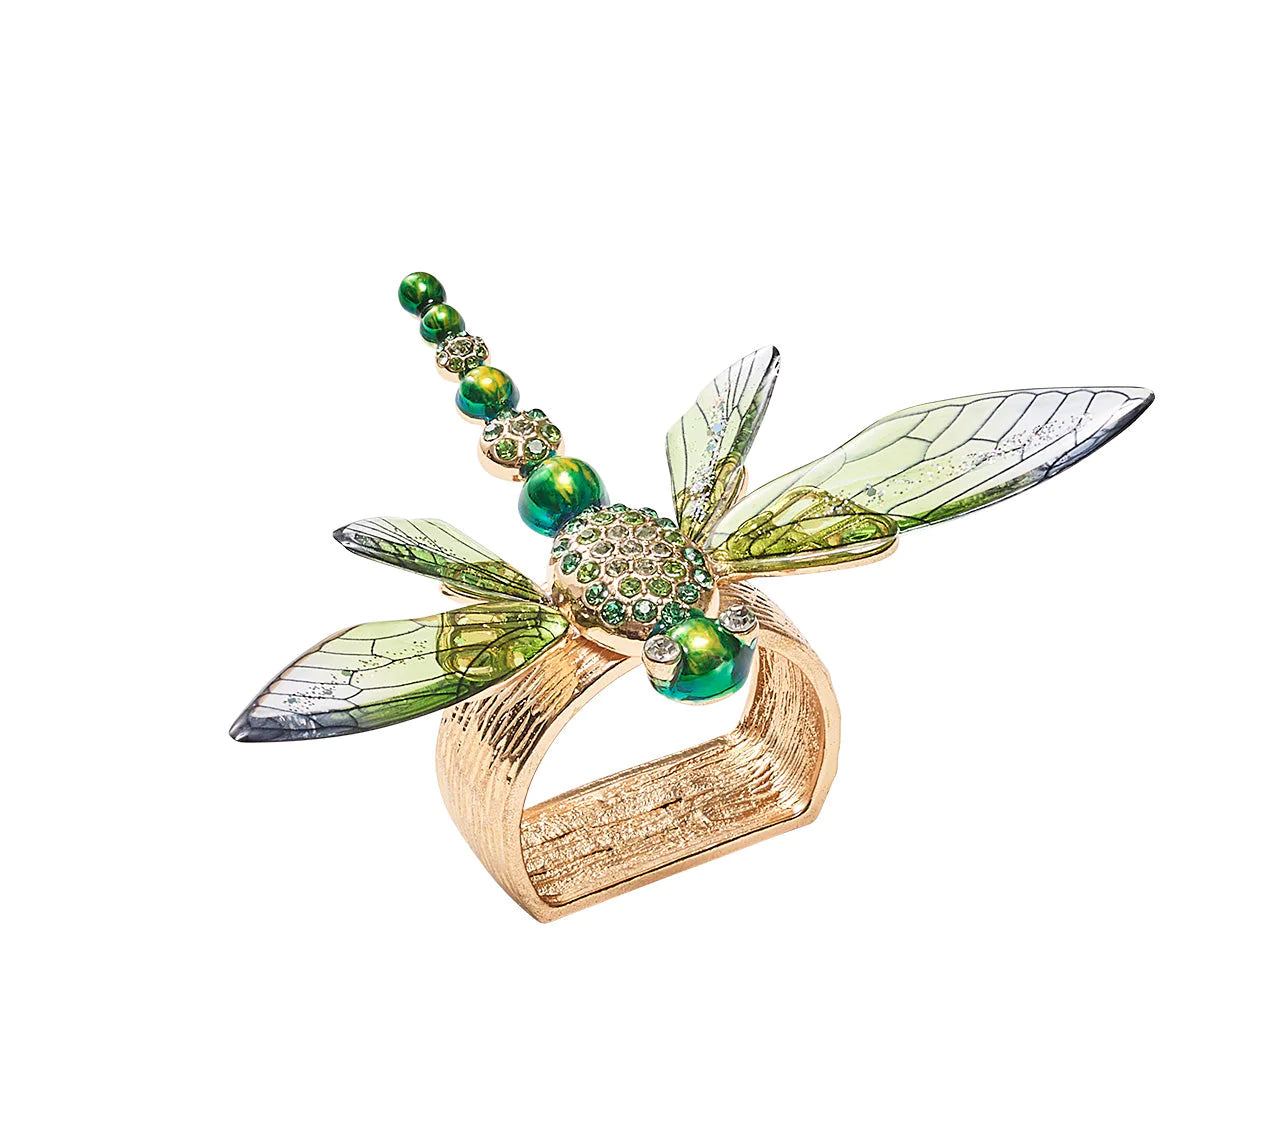 Dragonfly Napkin Ring in Green, Set of 4 in a Gift Box